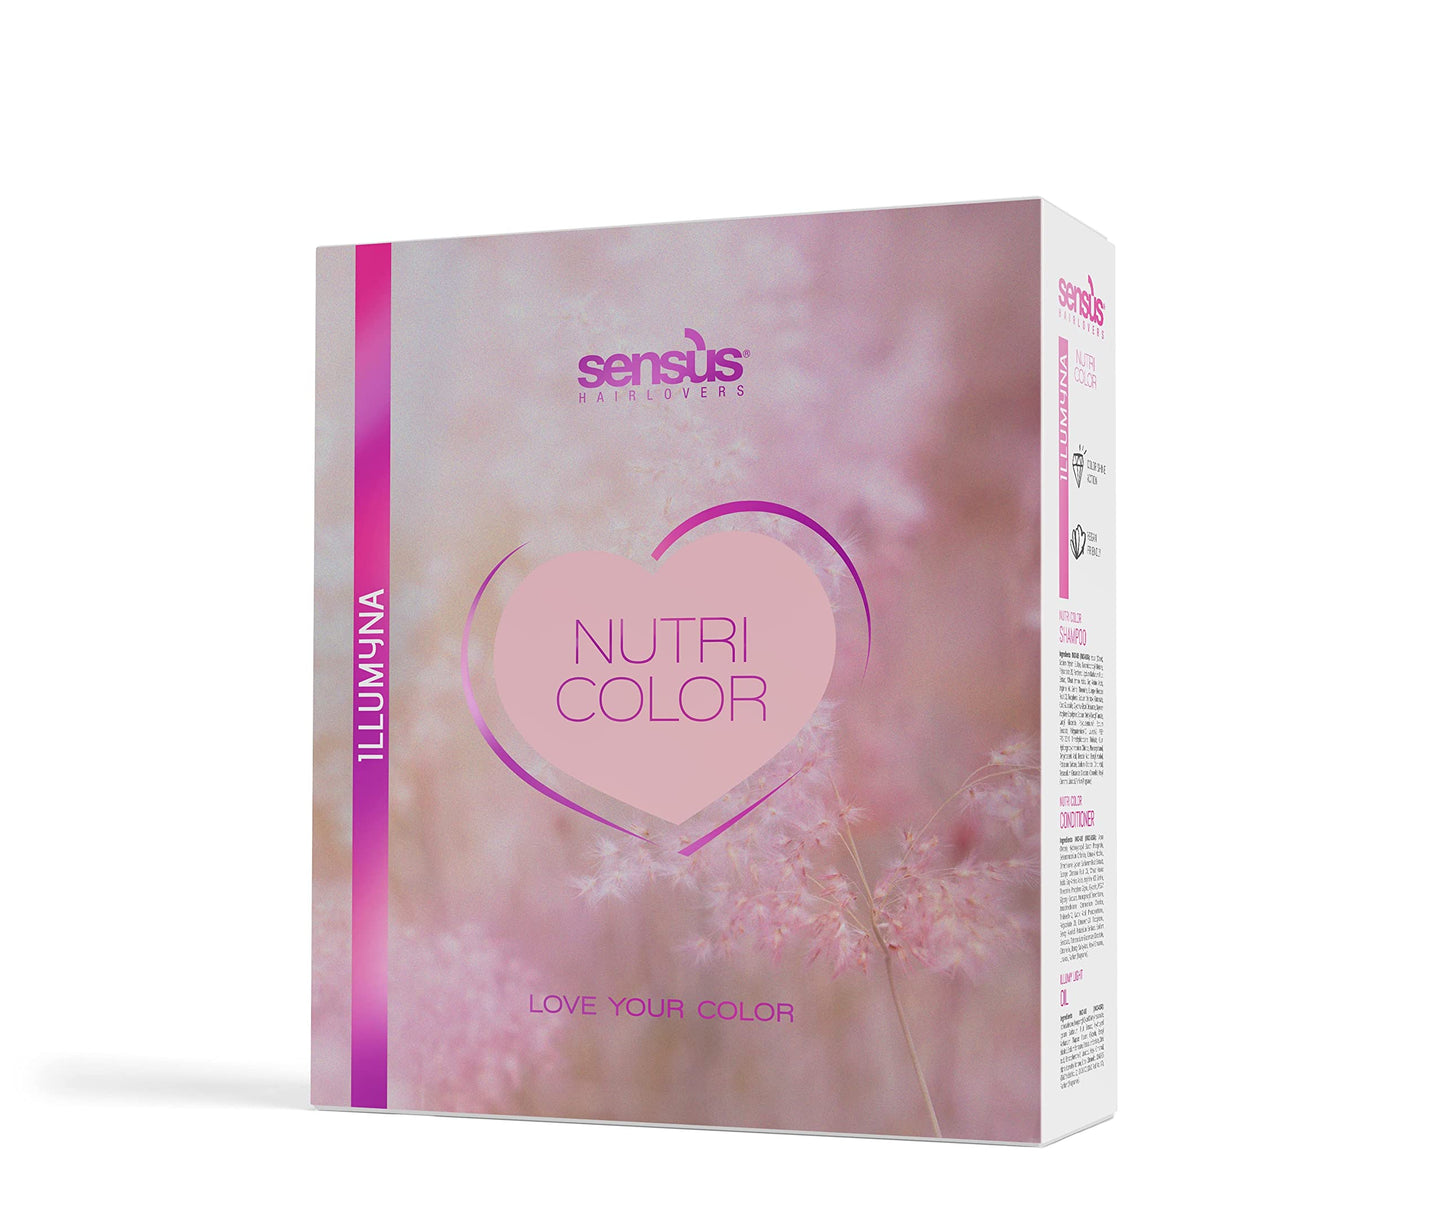 Nutri Color Kit - To Prolong Color Life